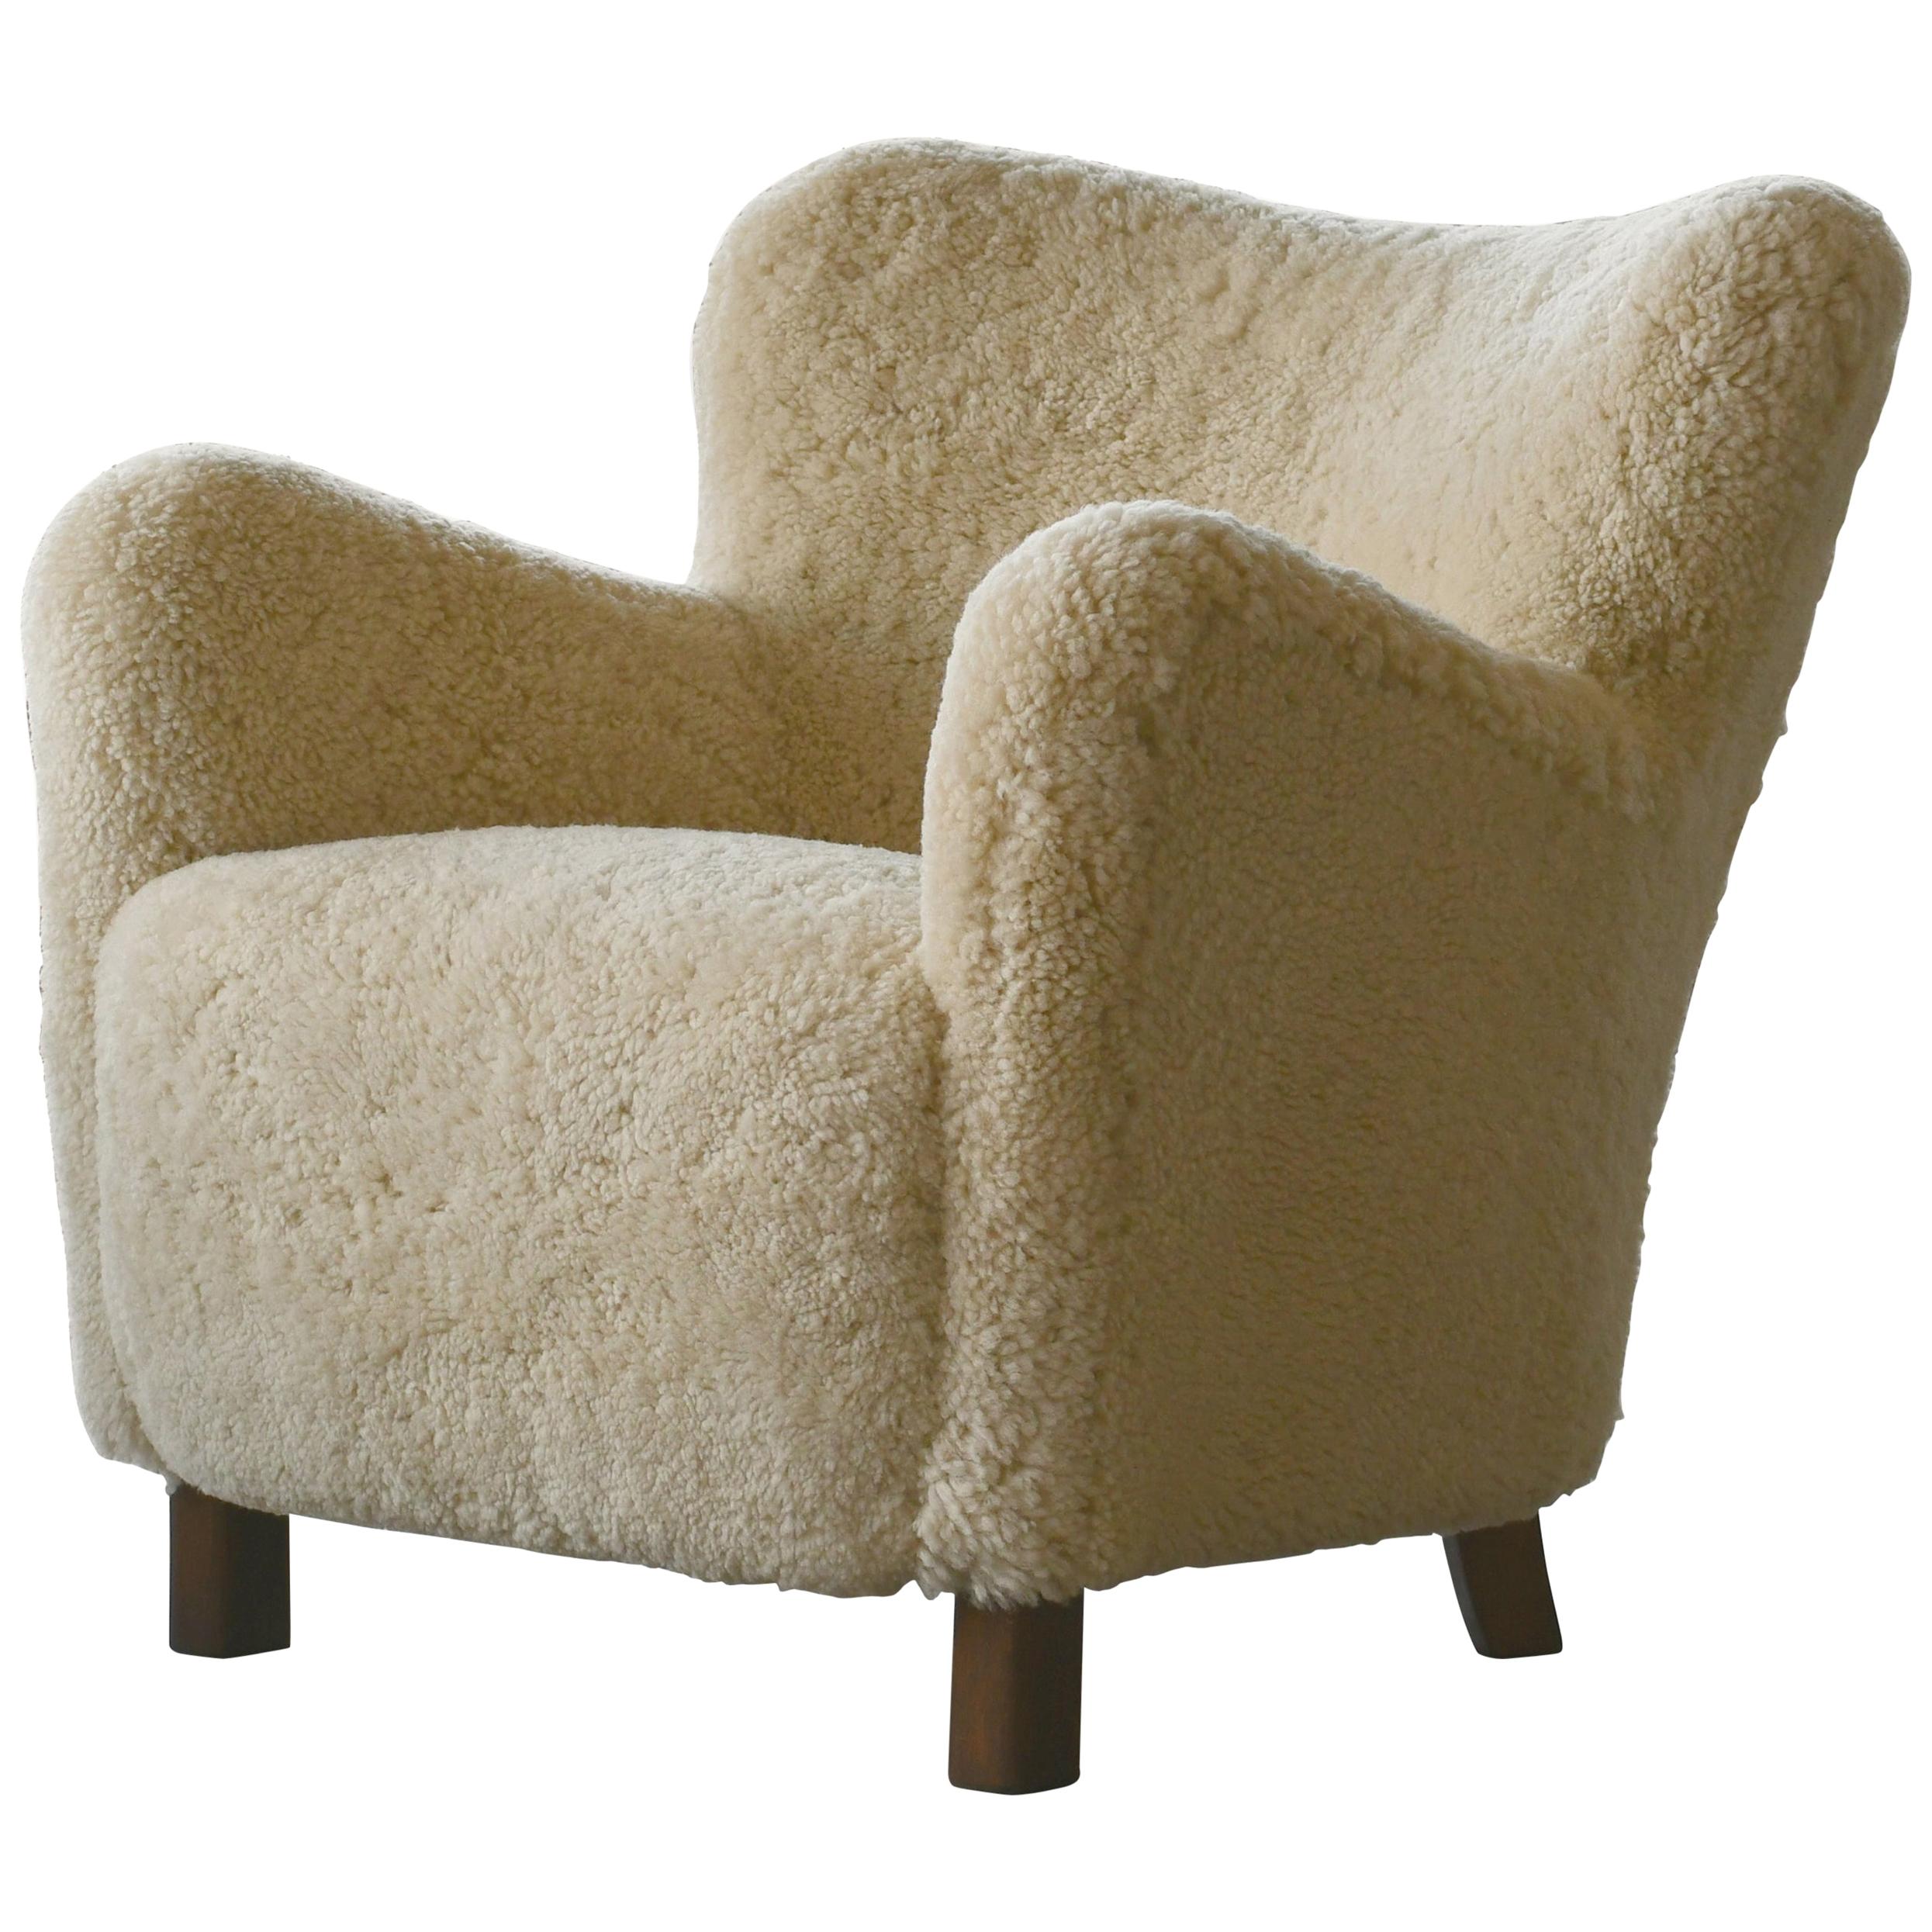 Custom Made 1940's Style Lounge Chair Upholstered in Beige Sheepskin Shearling For Sale